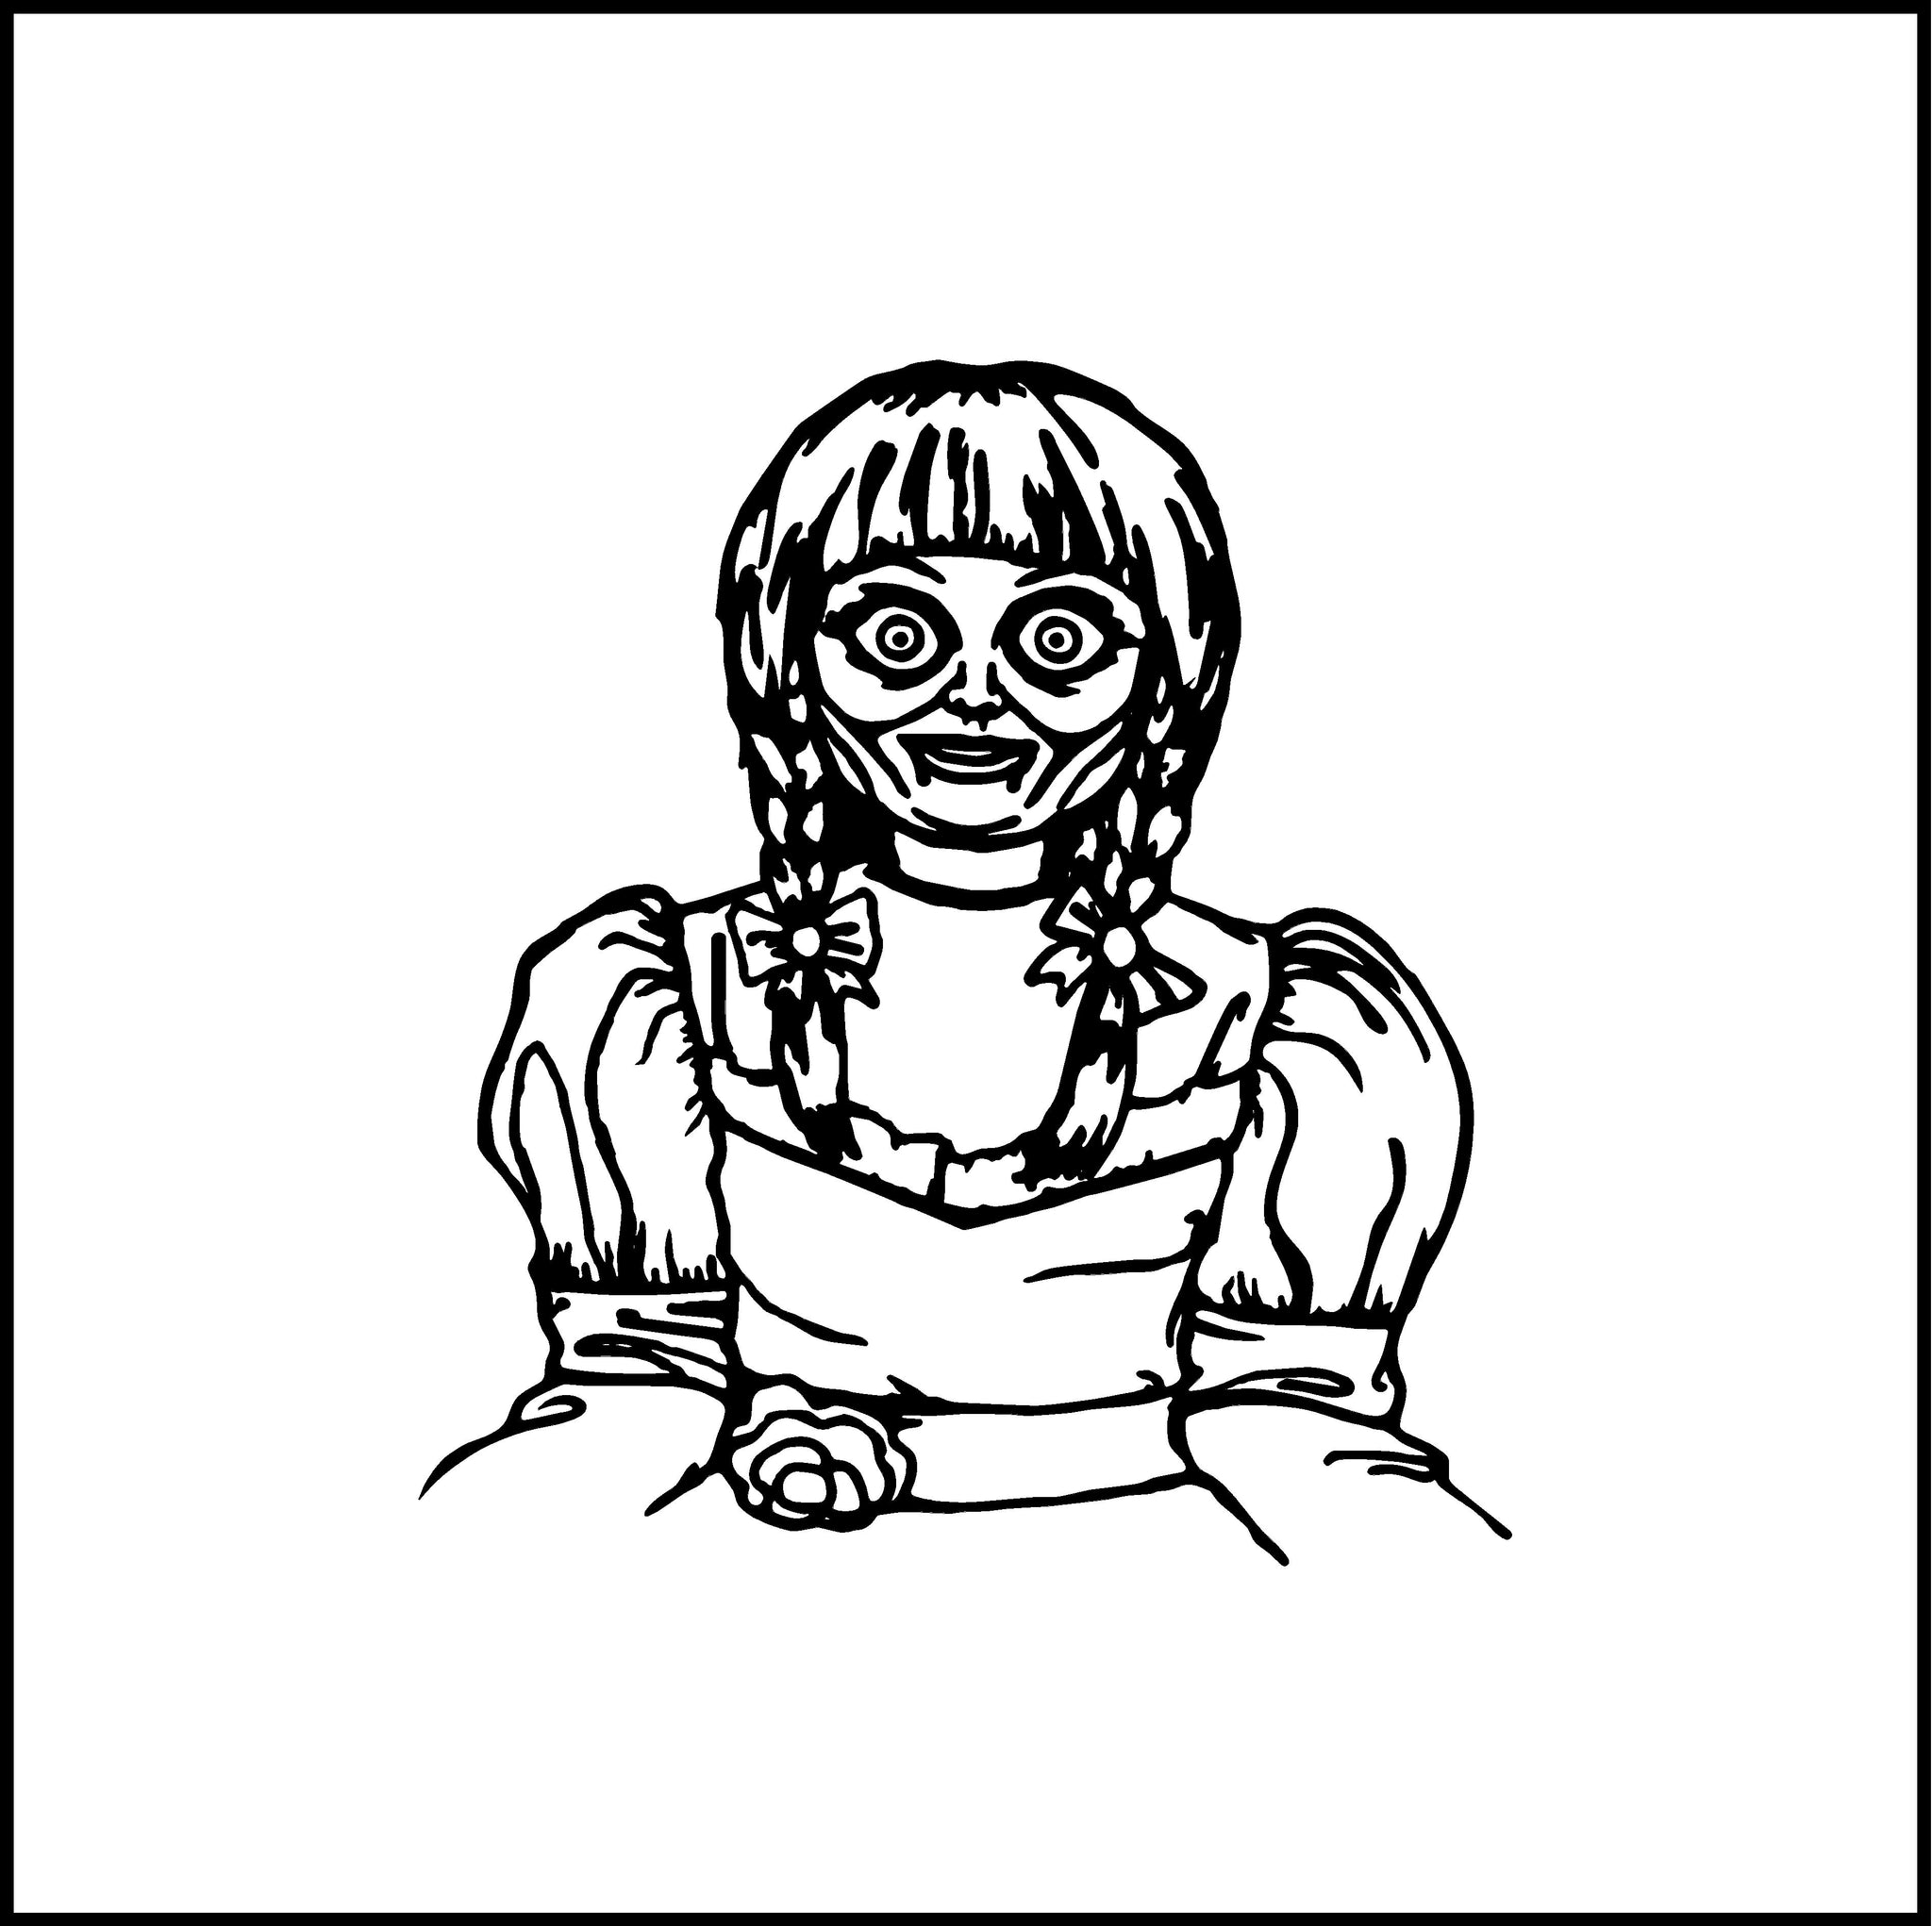 annabelle doll drawing easy - Clip Art Library